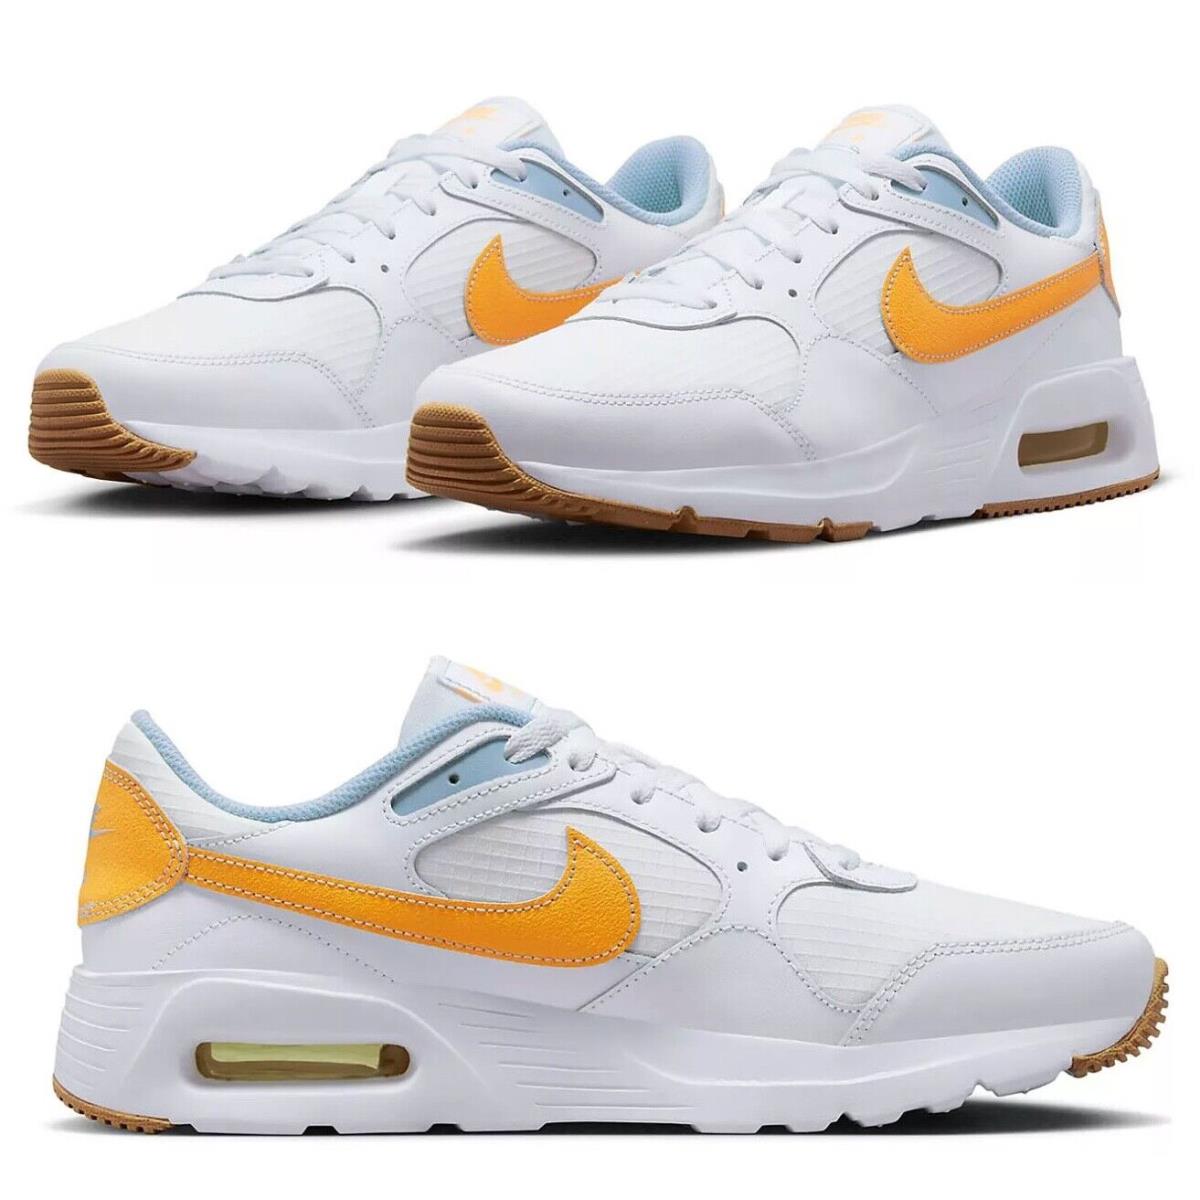 Nike Air Max SC Athletic Sneakers Shoes Casual Mens White Yellow 8-13 - White